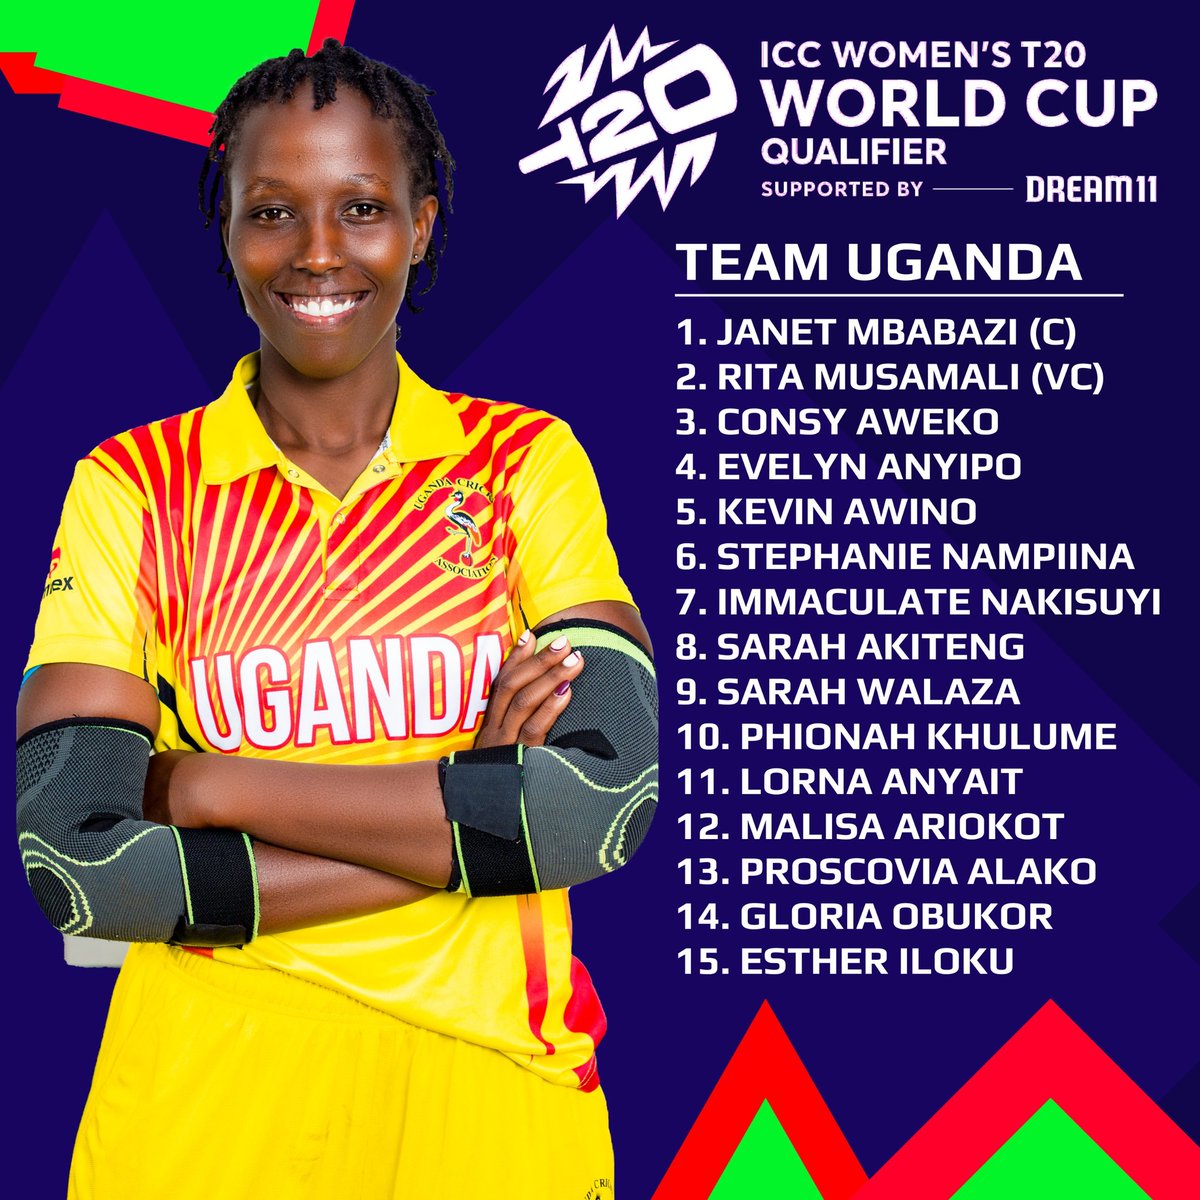 Cricket | There is change of guards in the Victoria Pearls team to ICC Women's T20 World Cup Qualifier.
Janet Mbabazi in for captaincy, replacing Consy Aweko.
@CricketUganda | #TalkWithRamzan